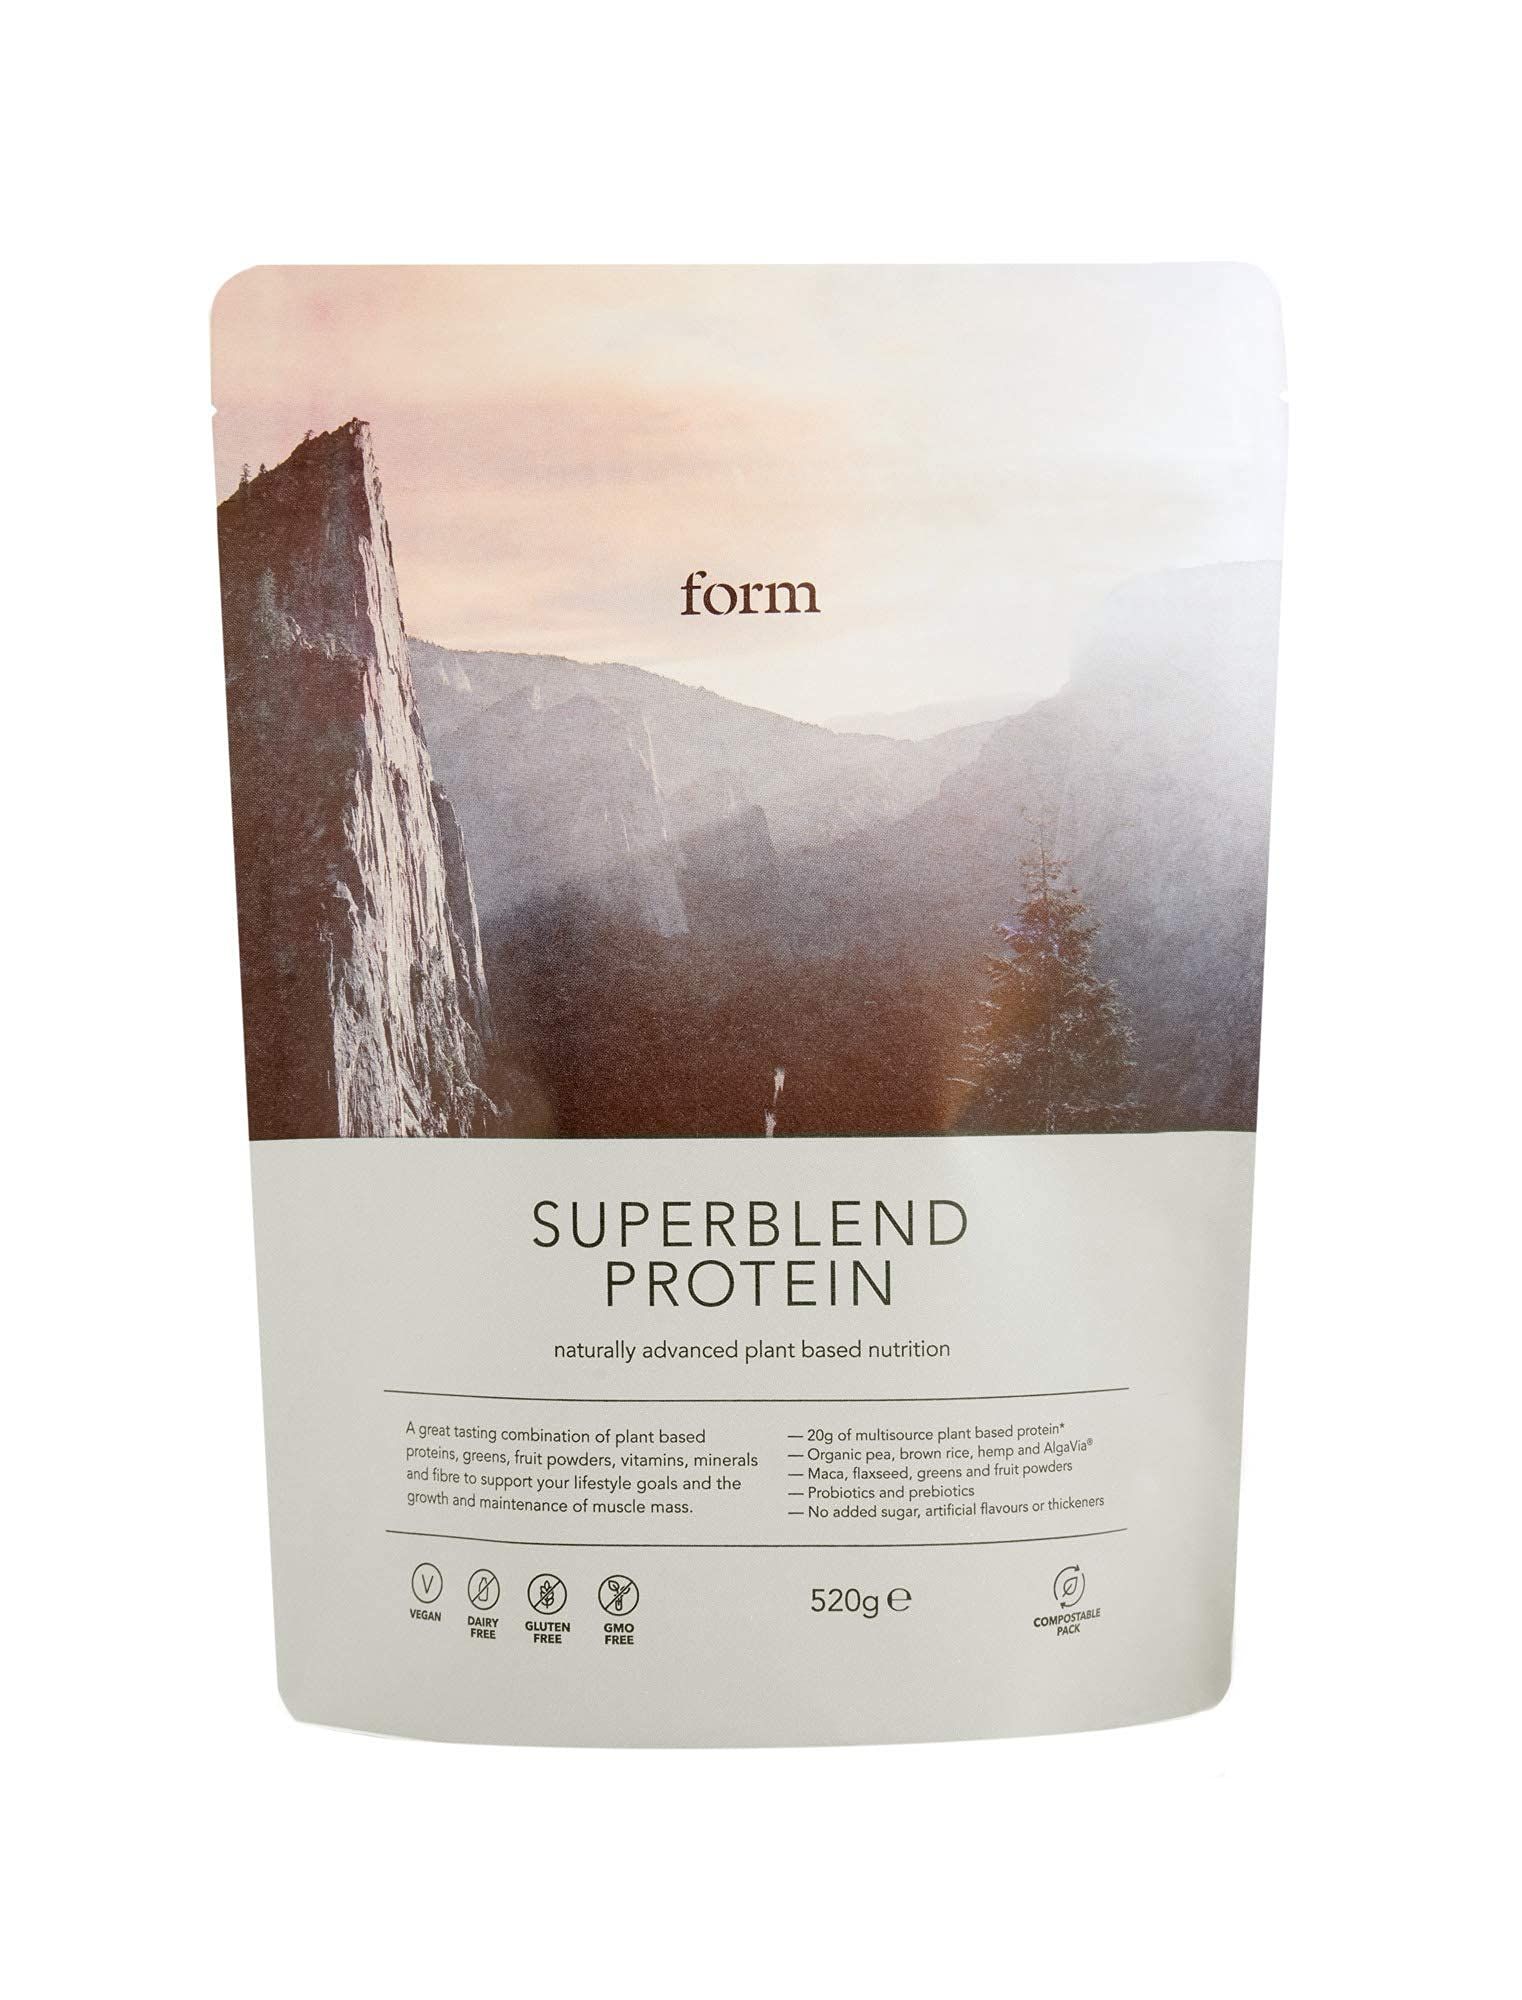 Form Superblend Protein - Vegan Protein Powder with Superfoods, Vitamins and Minerals - 20g of Plant Based Protein per Serving (Vanilla) | Amazon (UK)